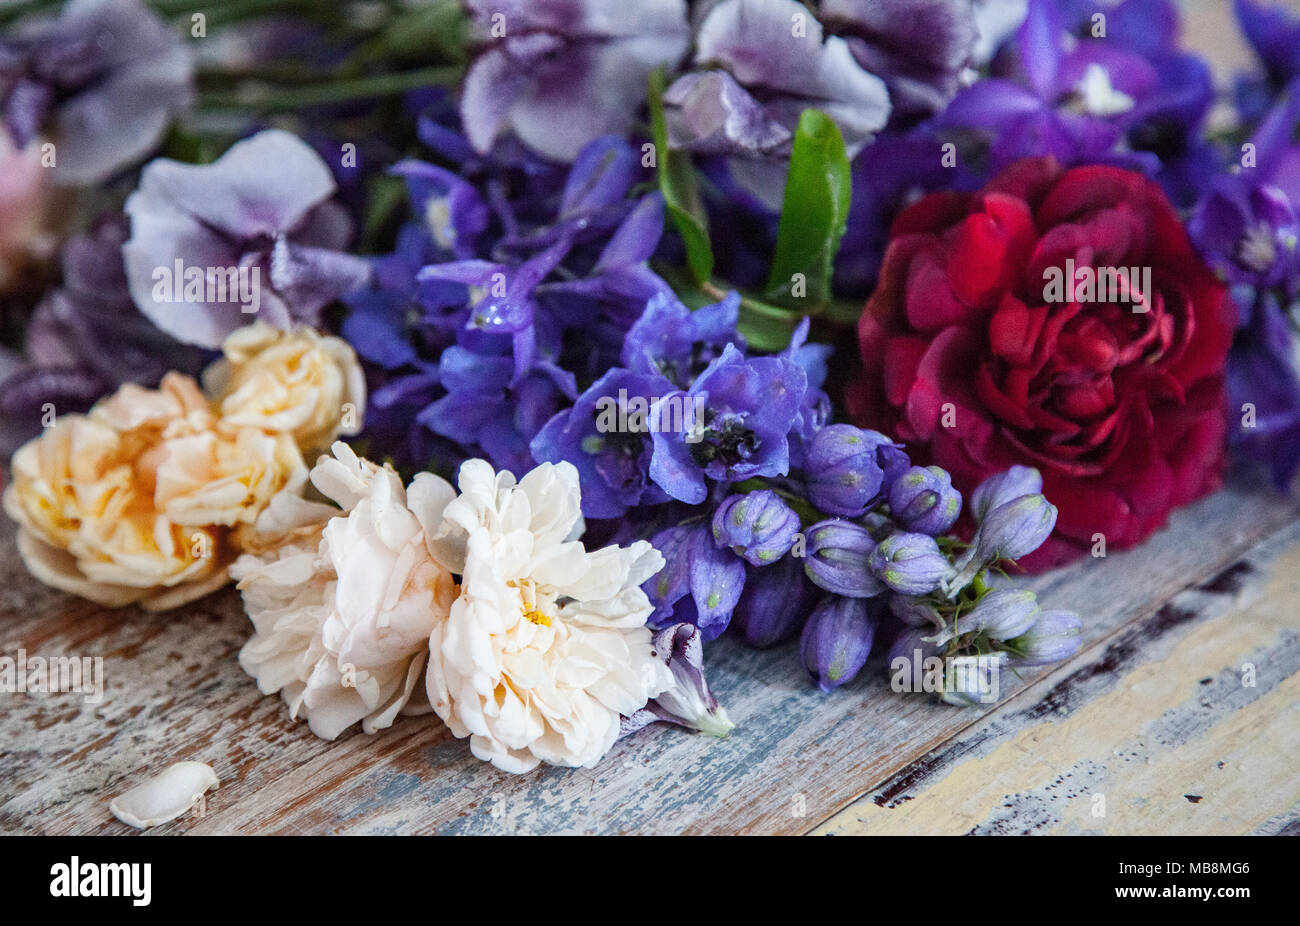 Cut flowers for celebration decorations Stock Photo